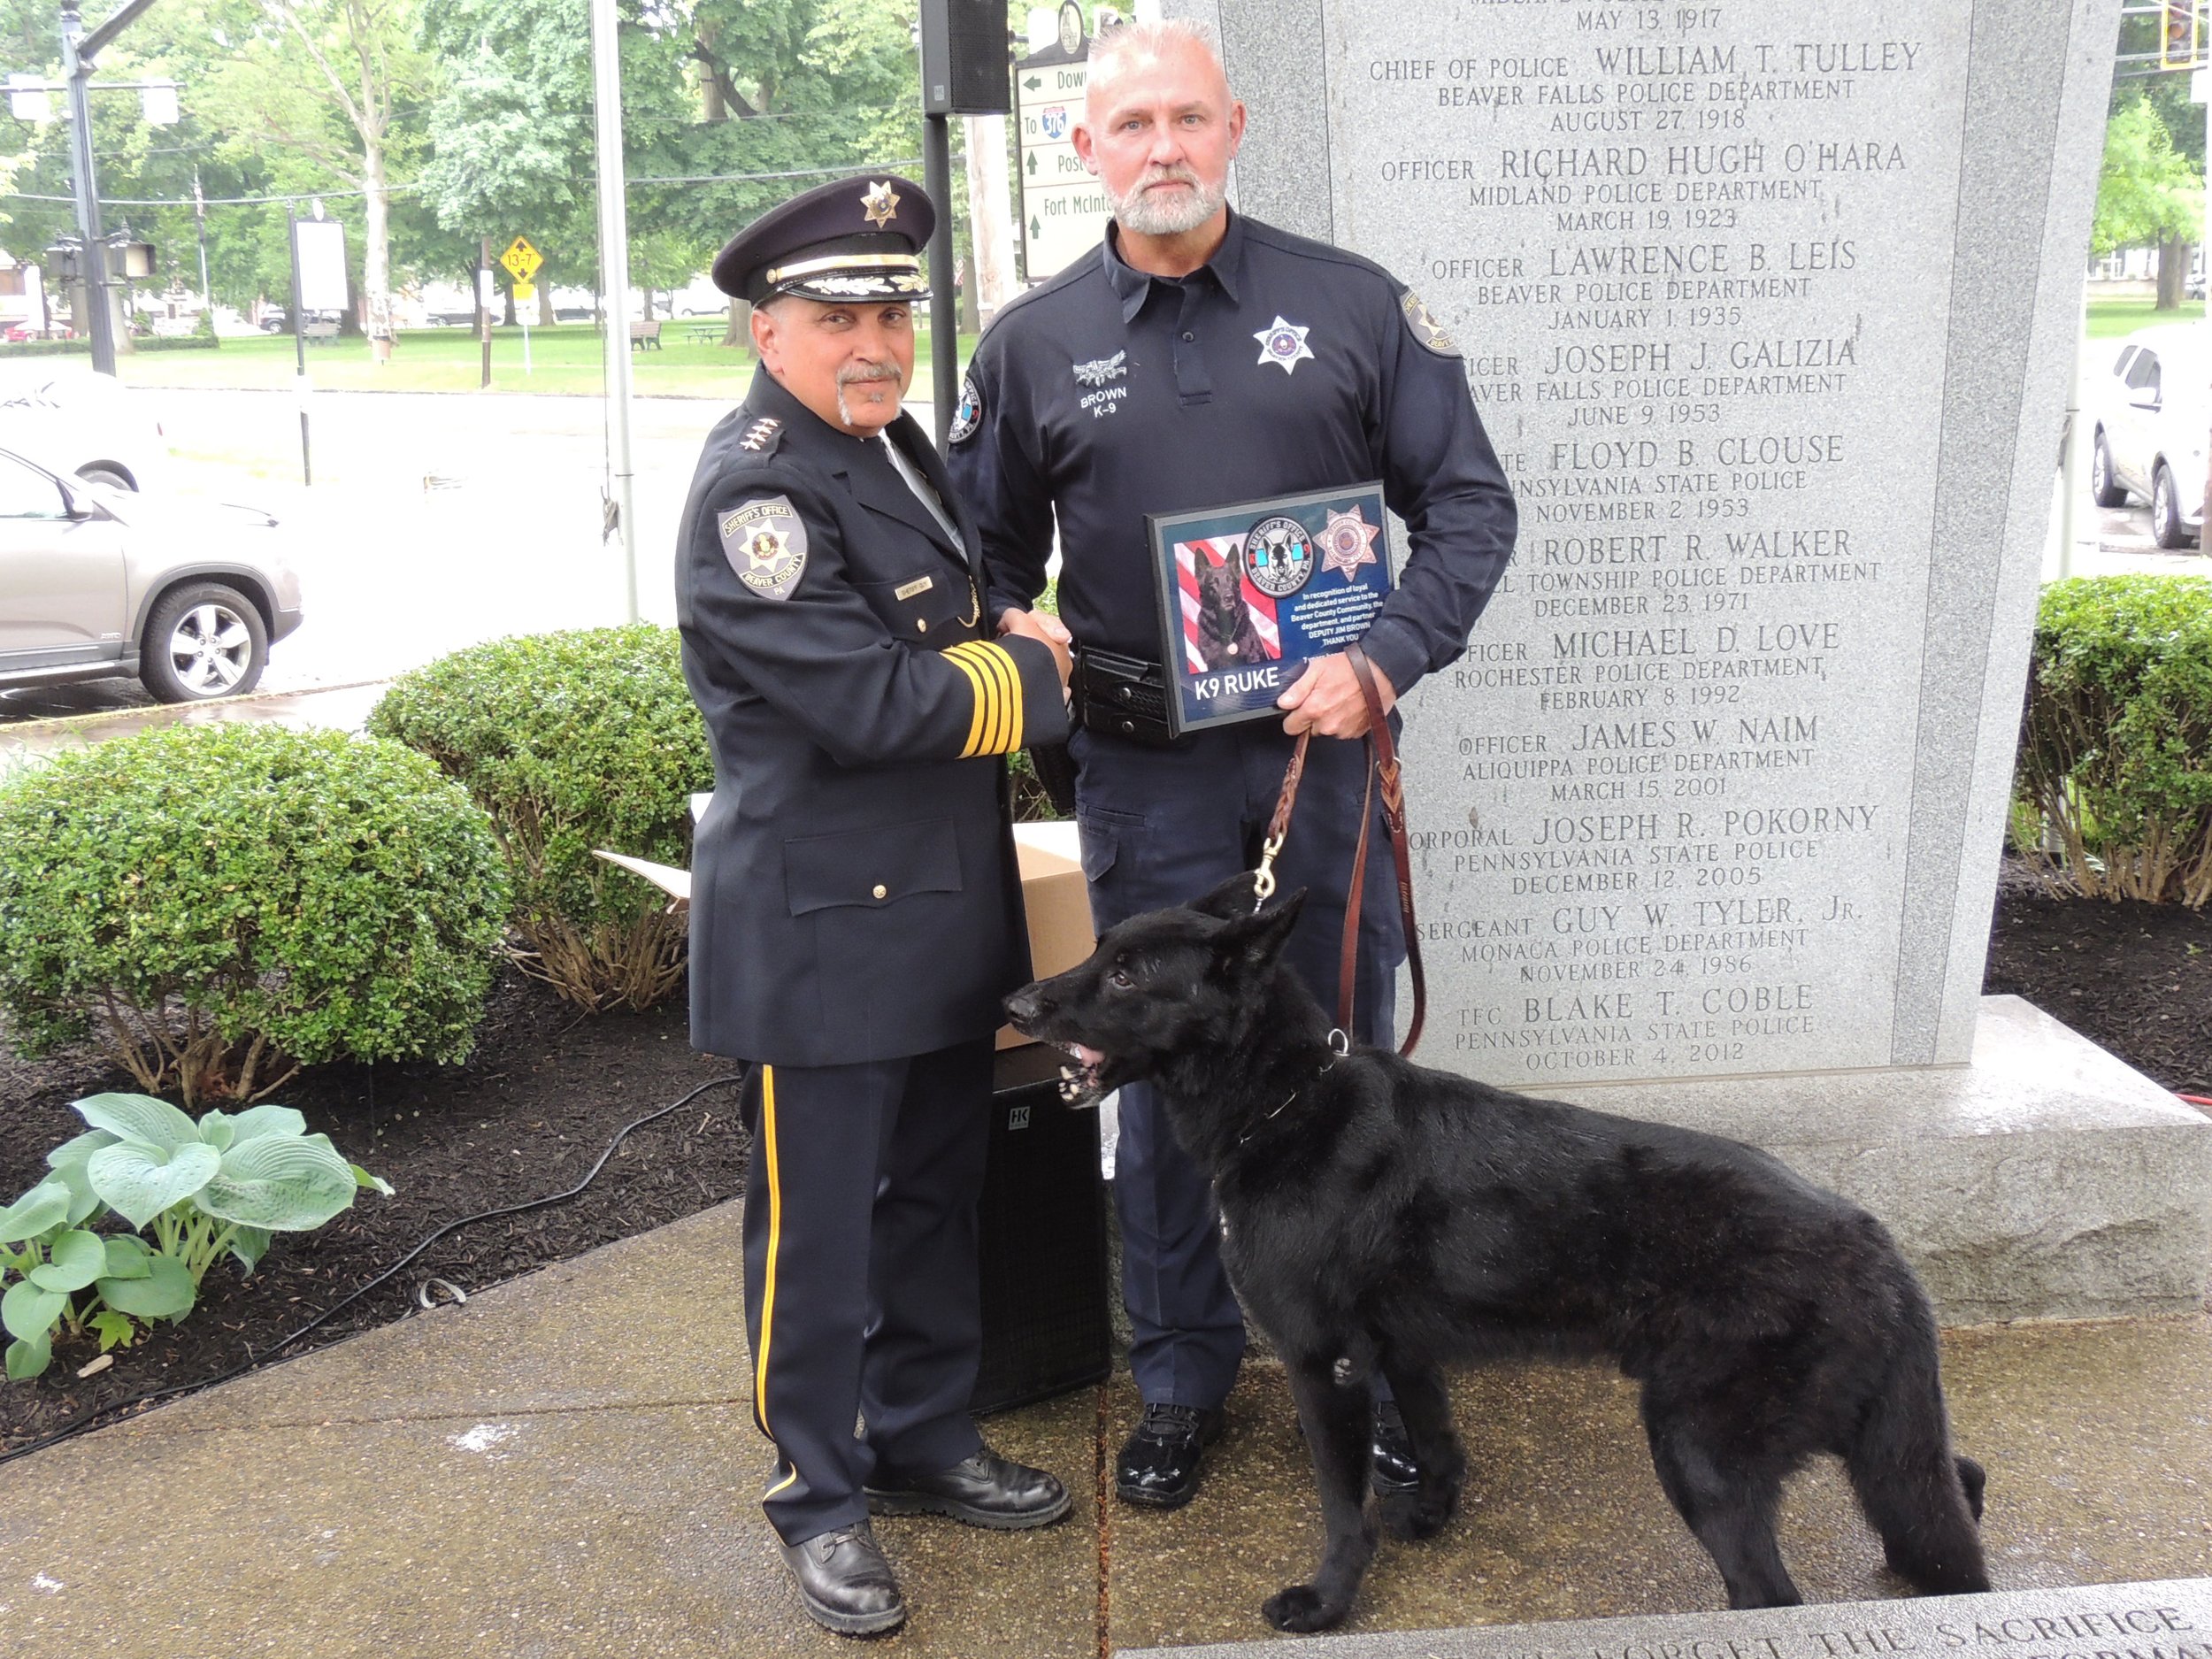 Sheriff Tony Guy presents K9 Officer Ruke with a retirement plaque for his loyal and dedicated service to his community and partner Deputy Jim Brown.